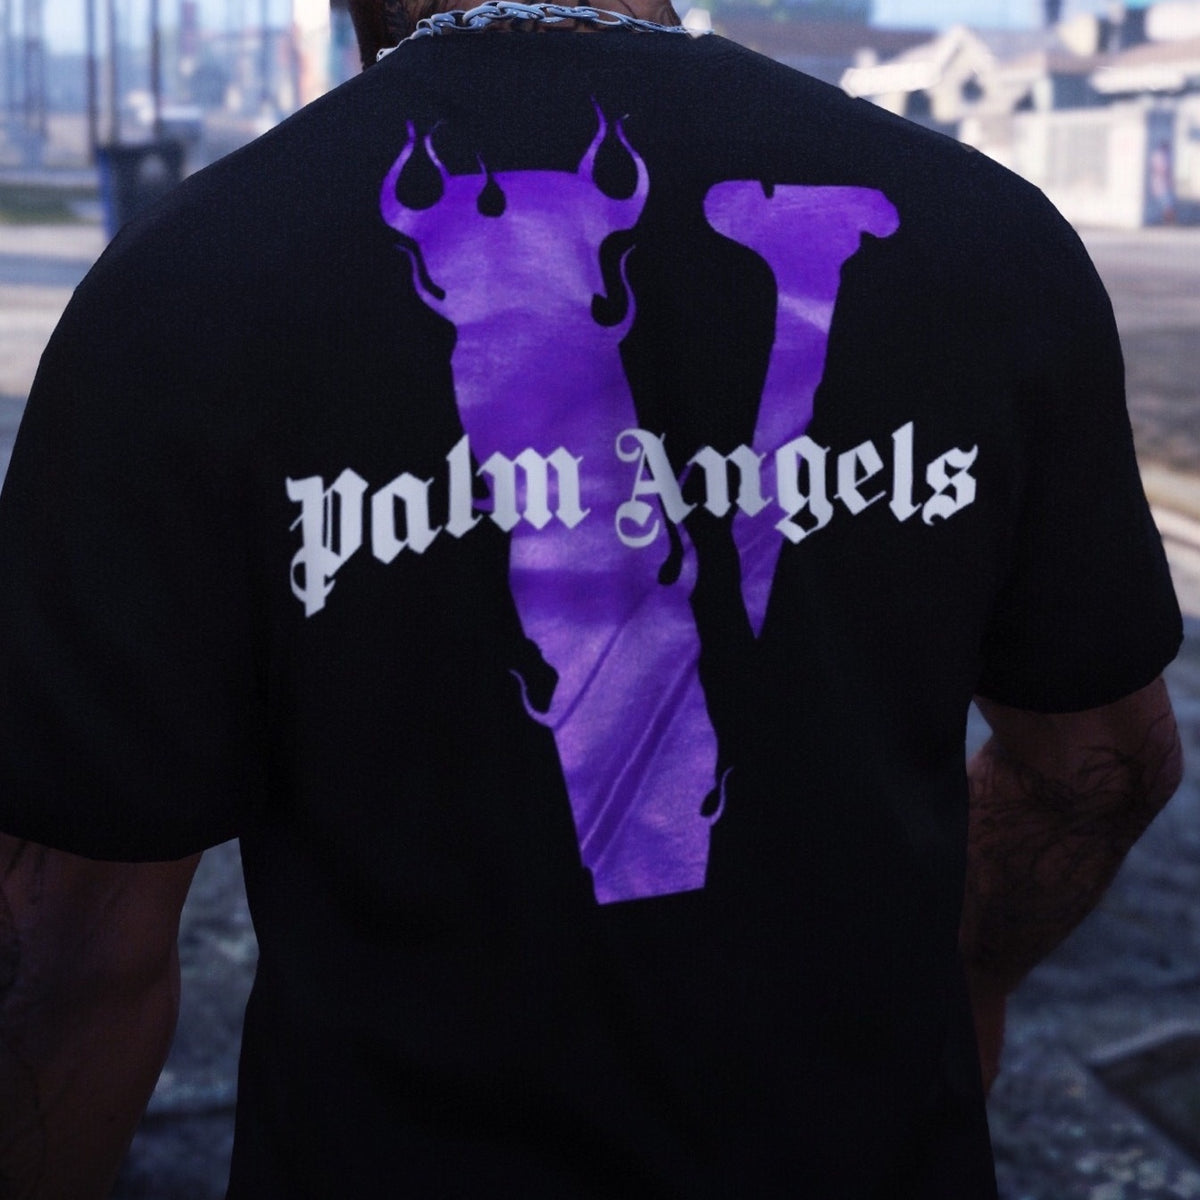 compare stores Authentic Vlone x Palm Angels T-Shirt